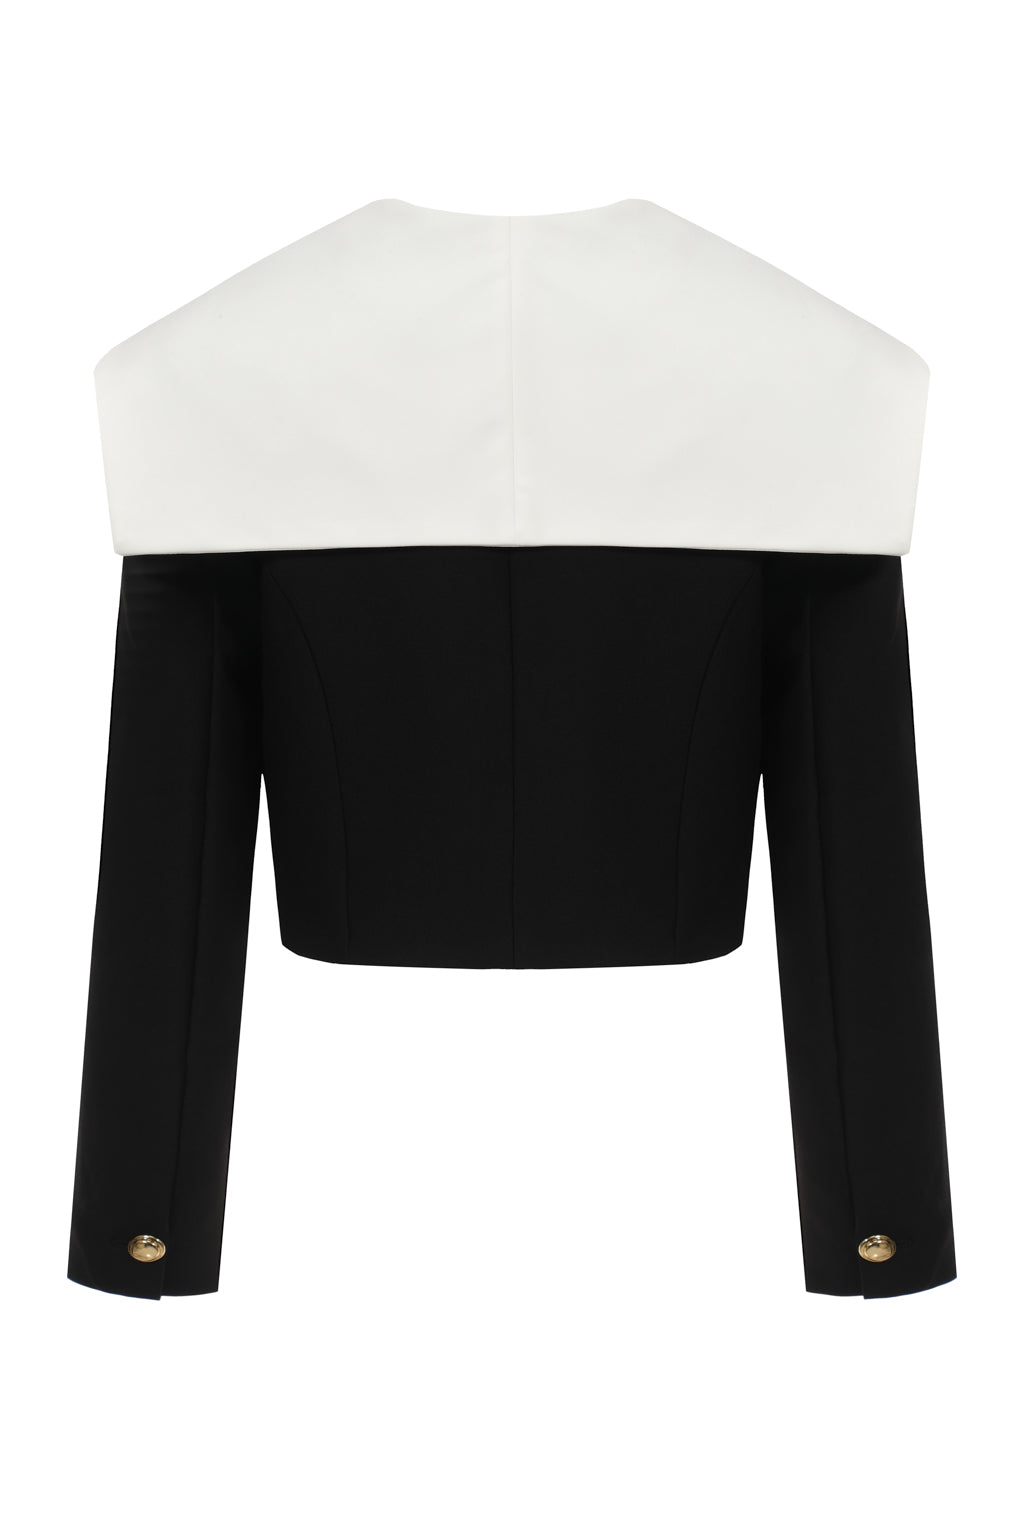 Cropped blazer with oversized collar - black and white